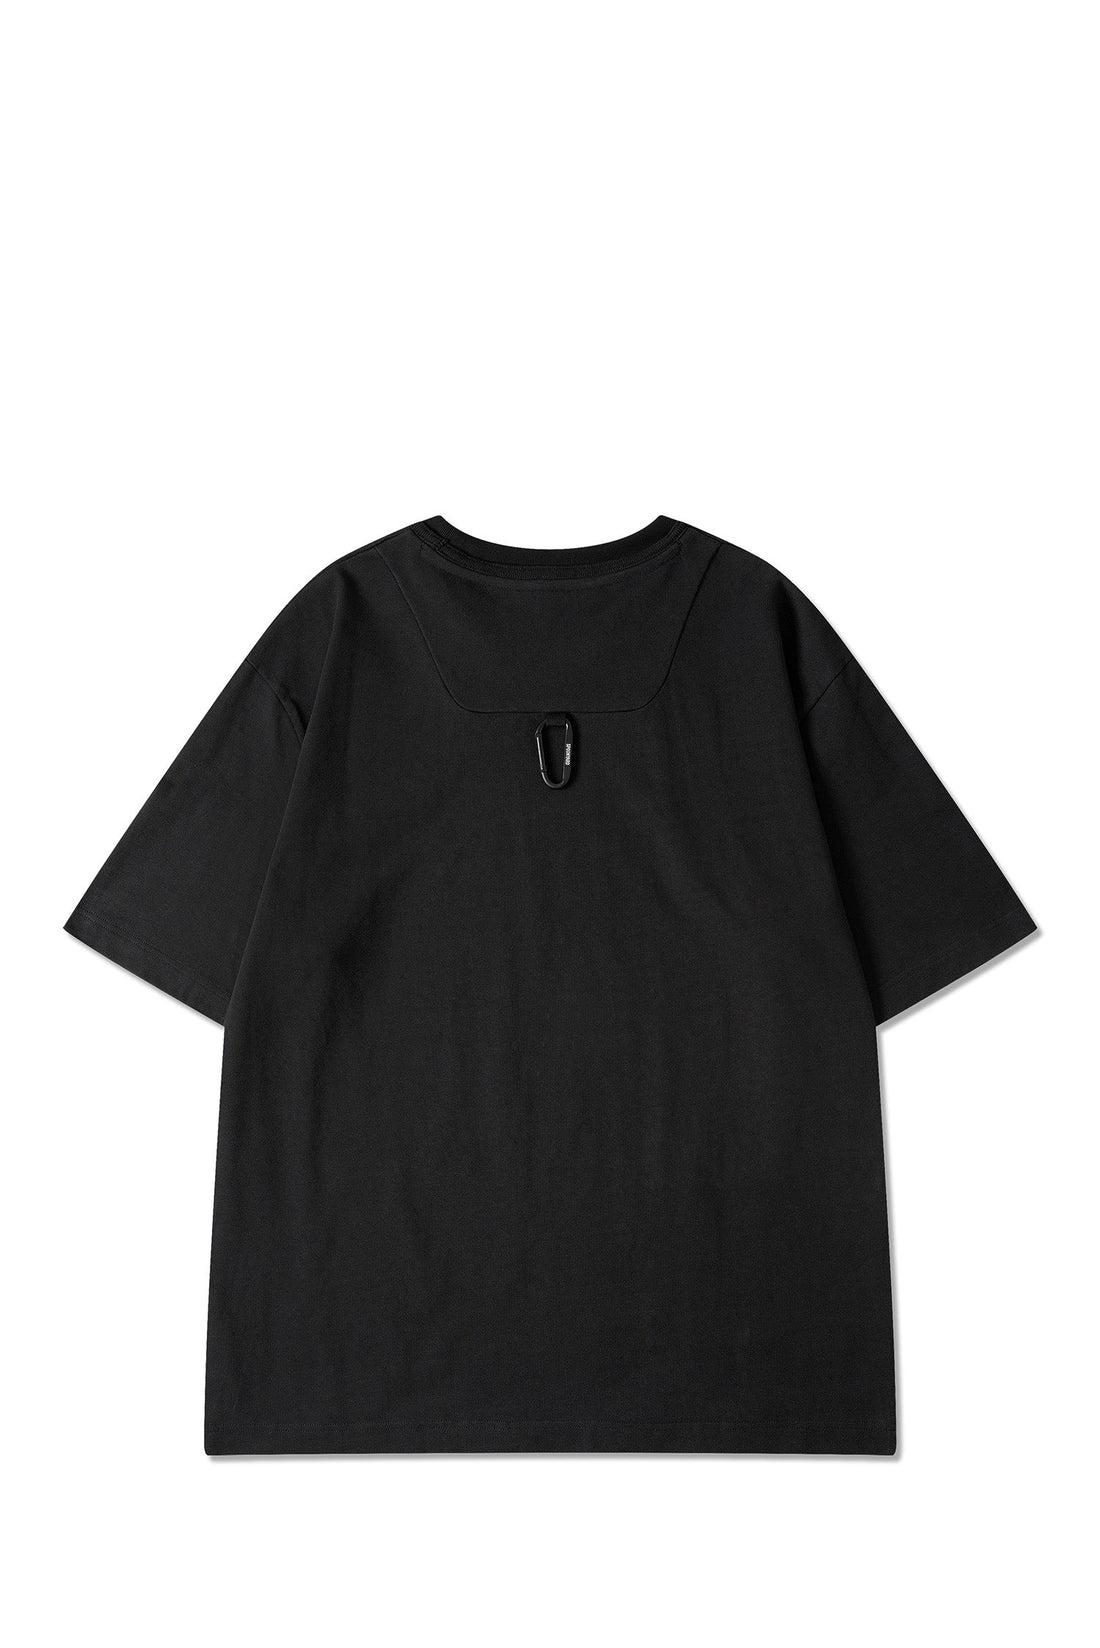 MEN'S ATTACHED POCKET TEE